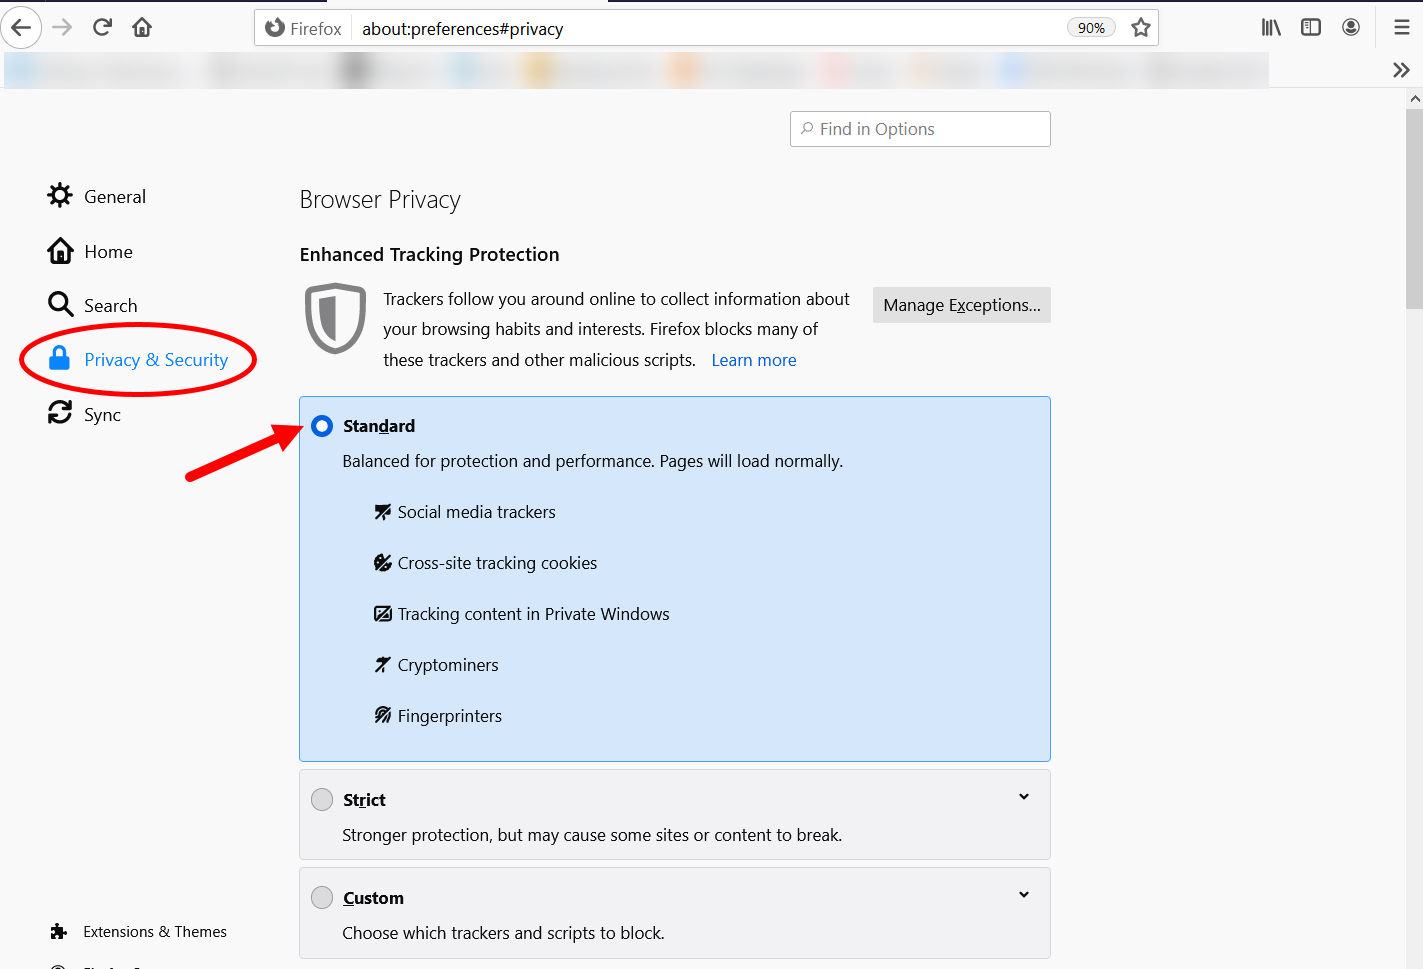 Firefox privacy and security page with Standard default option selected and identified as described